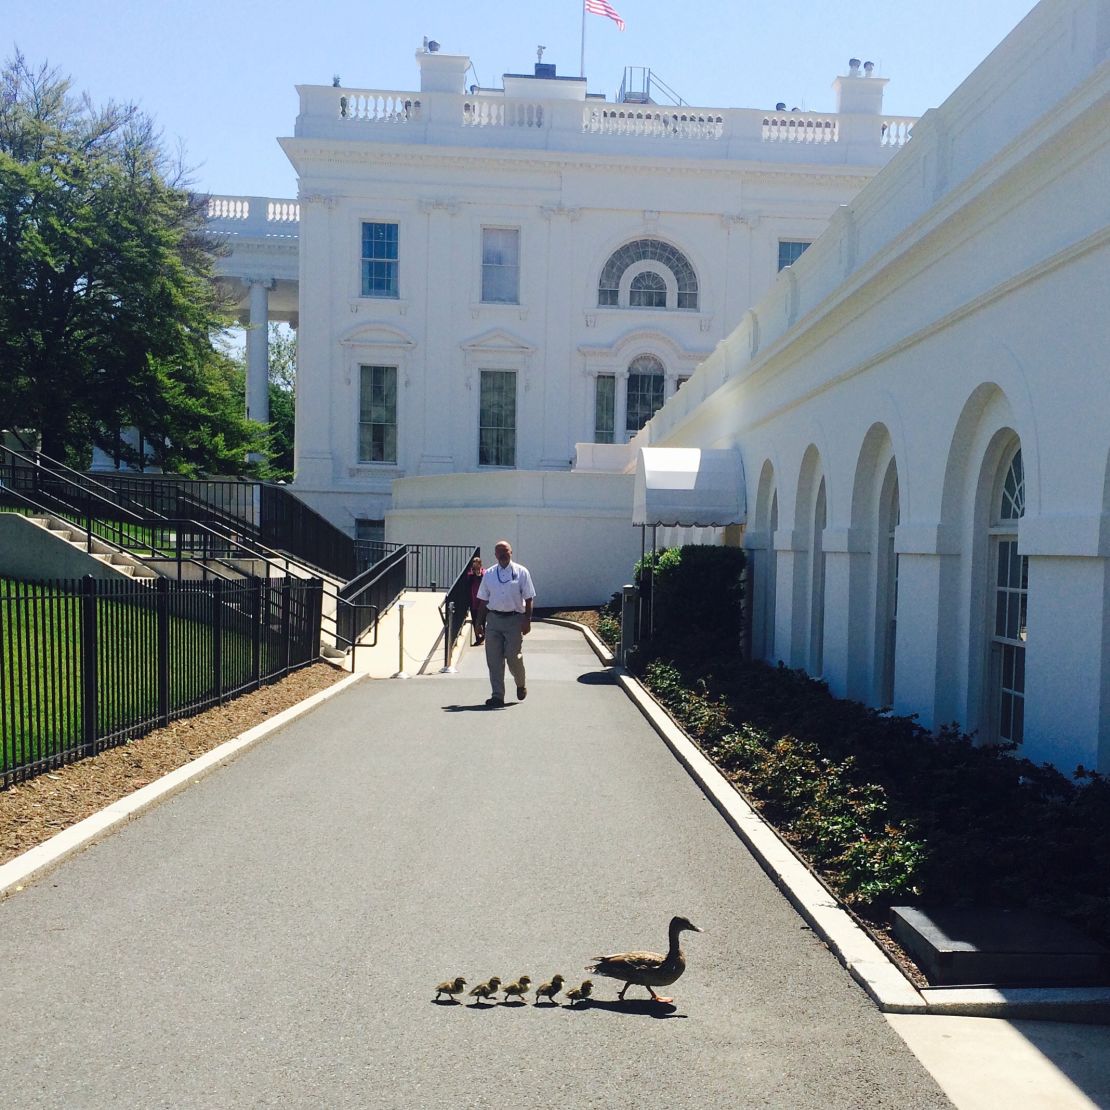 A duck and ducklings at the White House